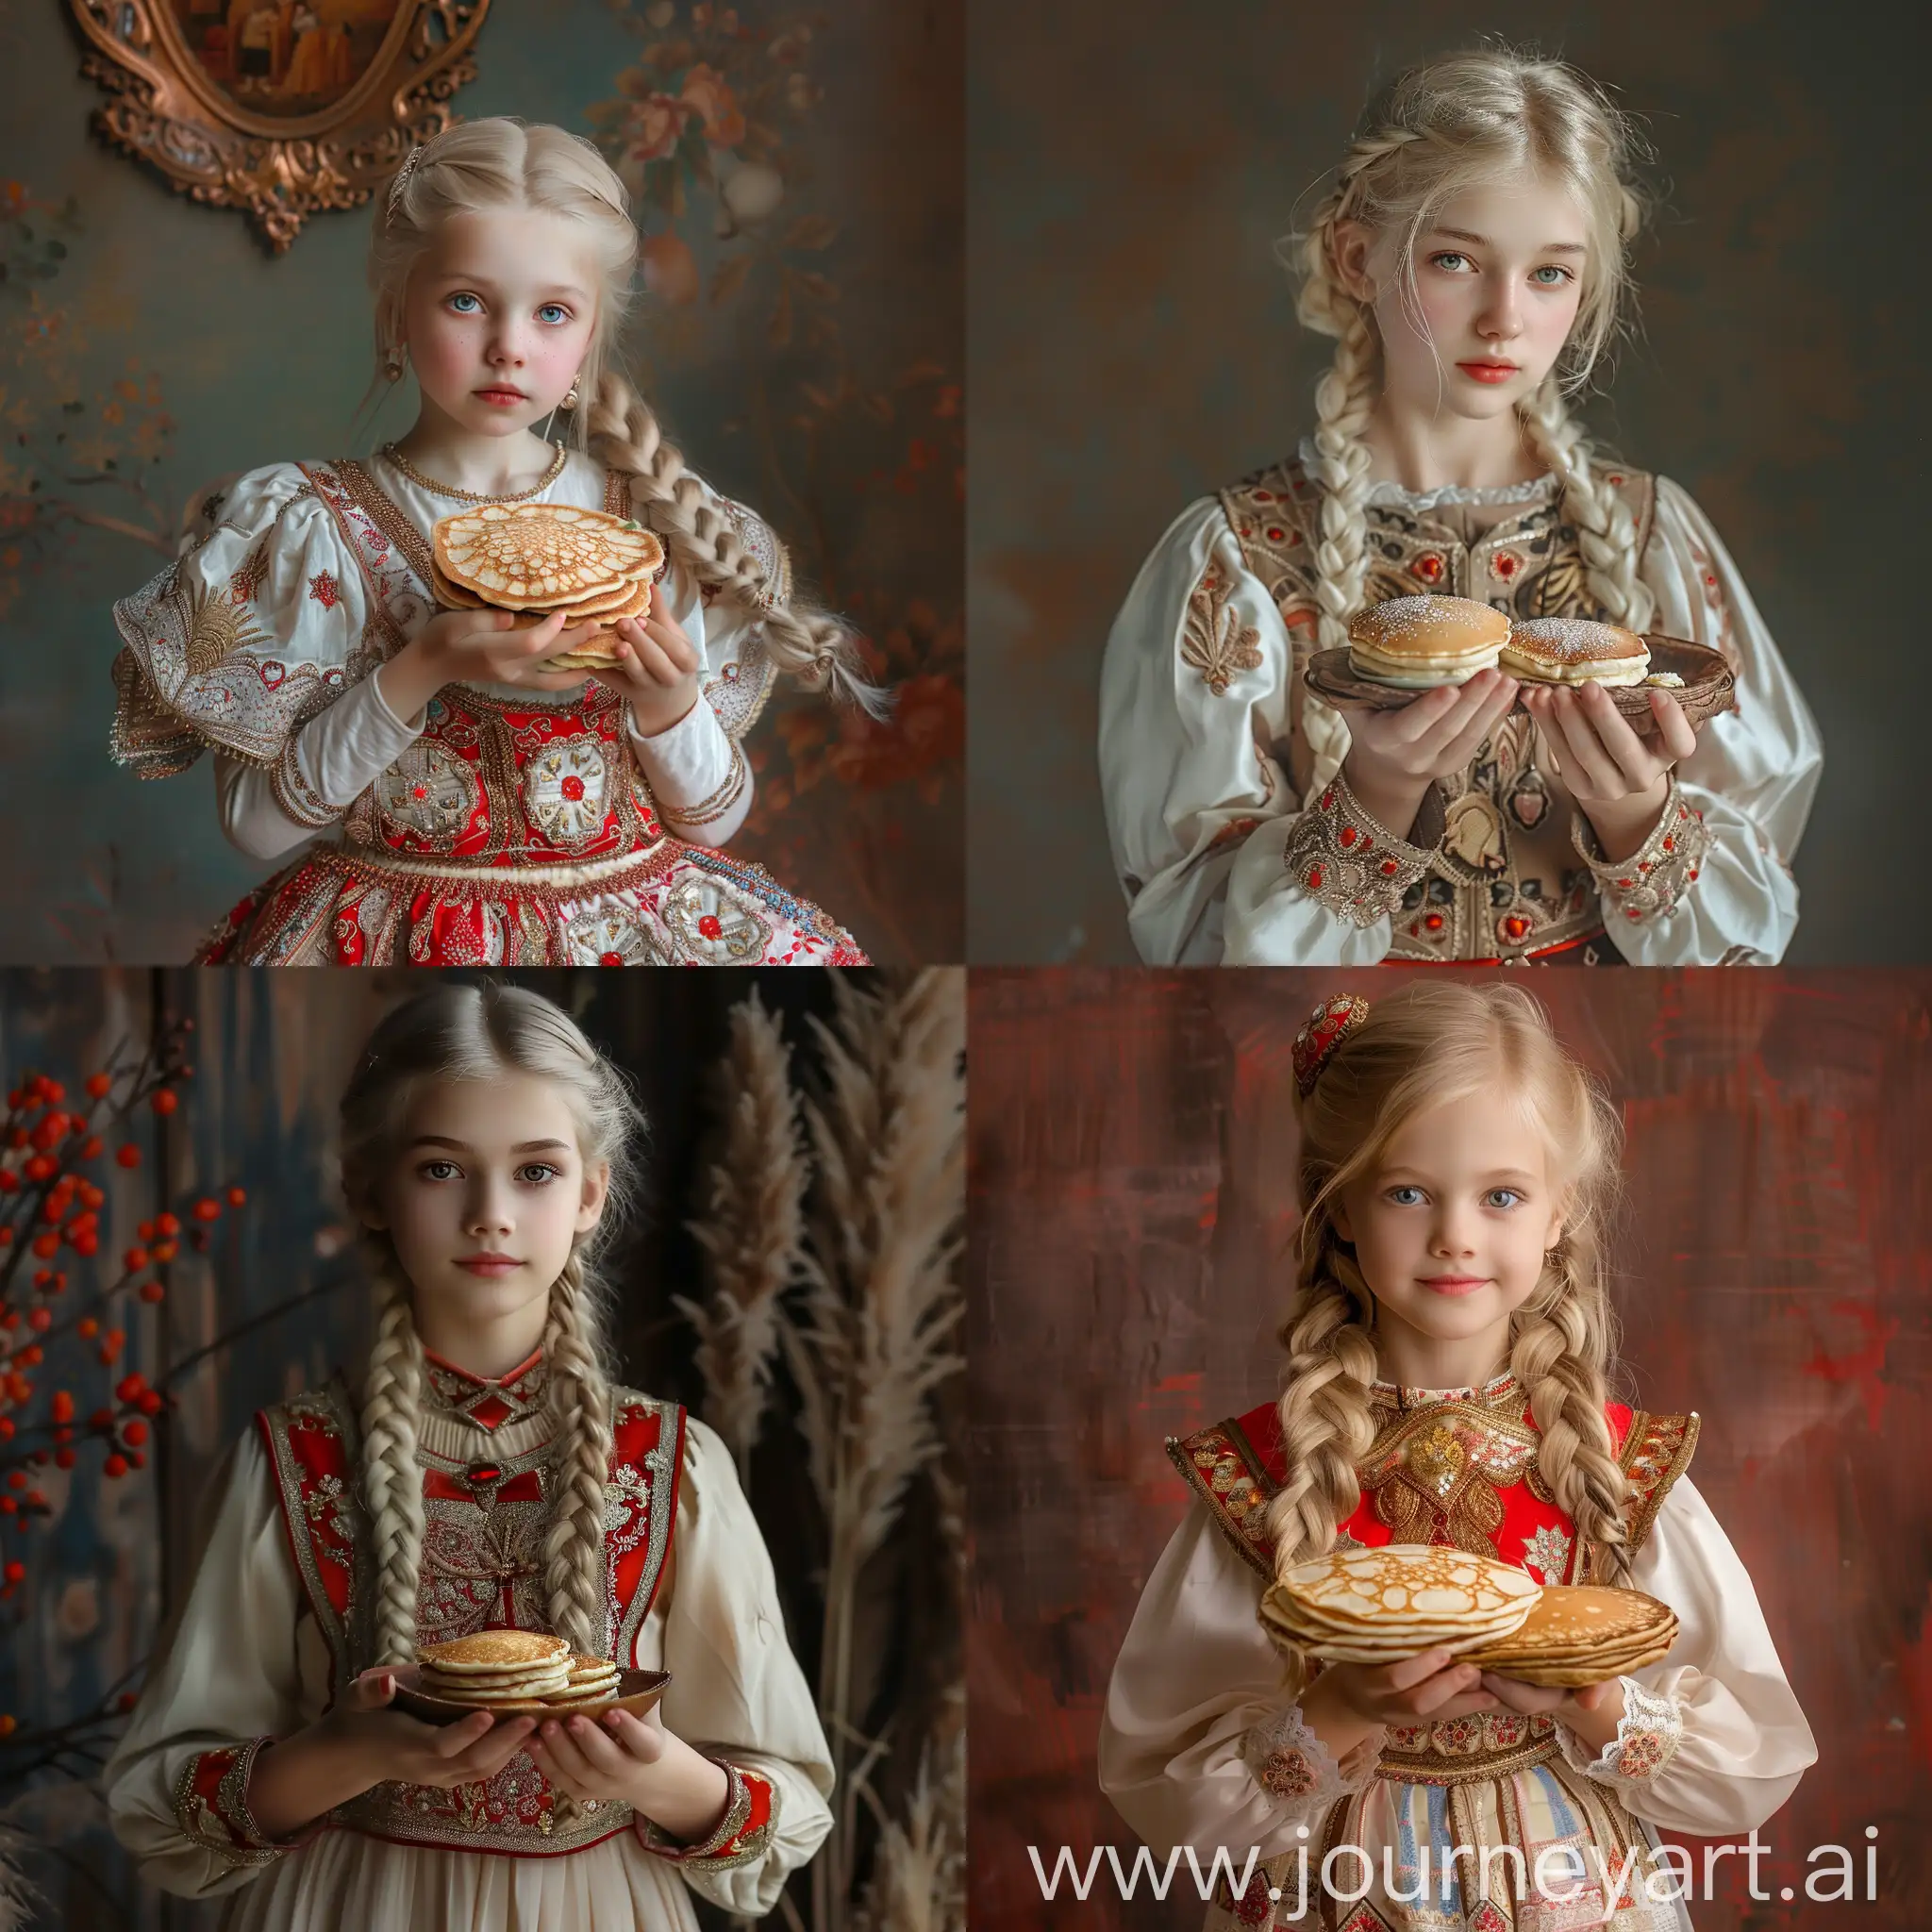 Russian-Girl-Celebrating-Pancake-Day-with-Handcrafted-Delights